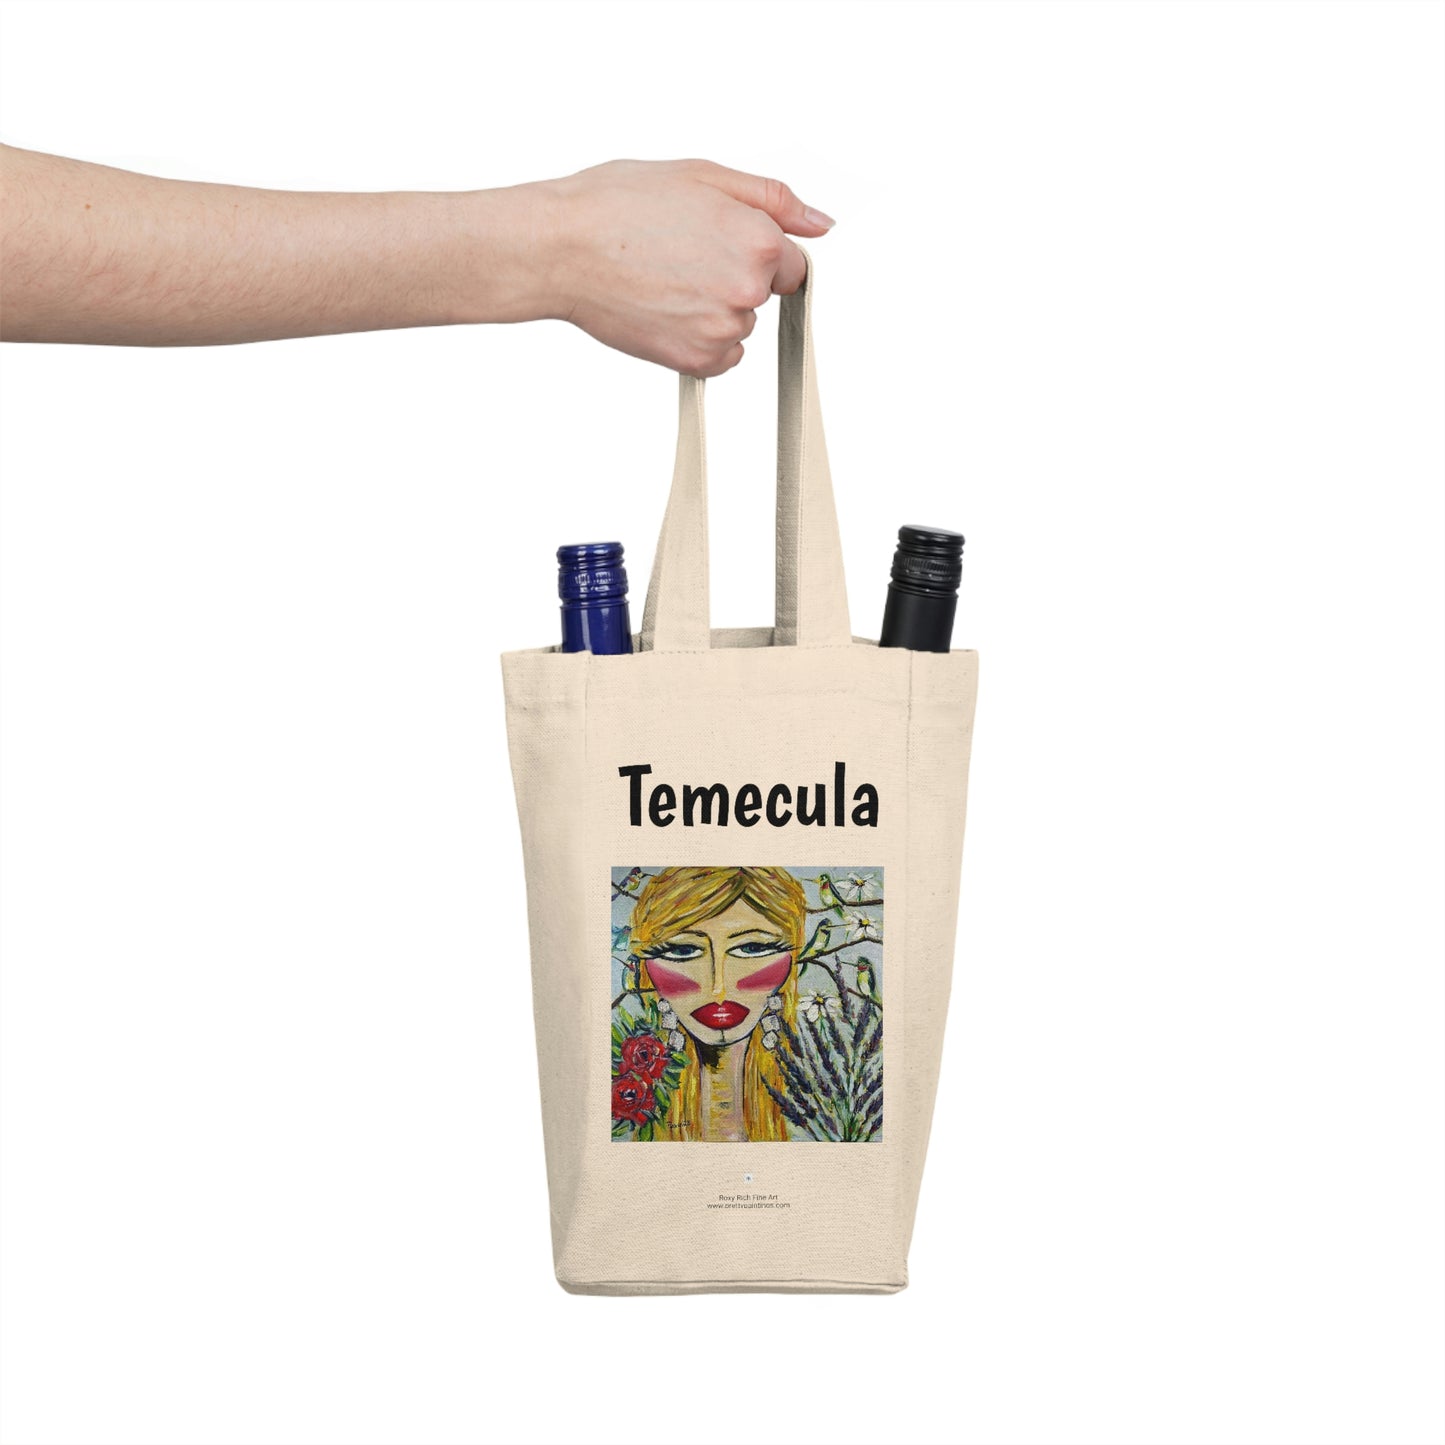 Temecula Double Wine Tote Bag featuring "Hummingbird Lady" painting